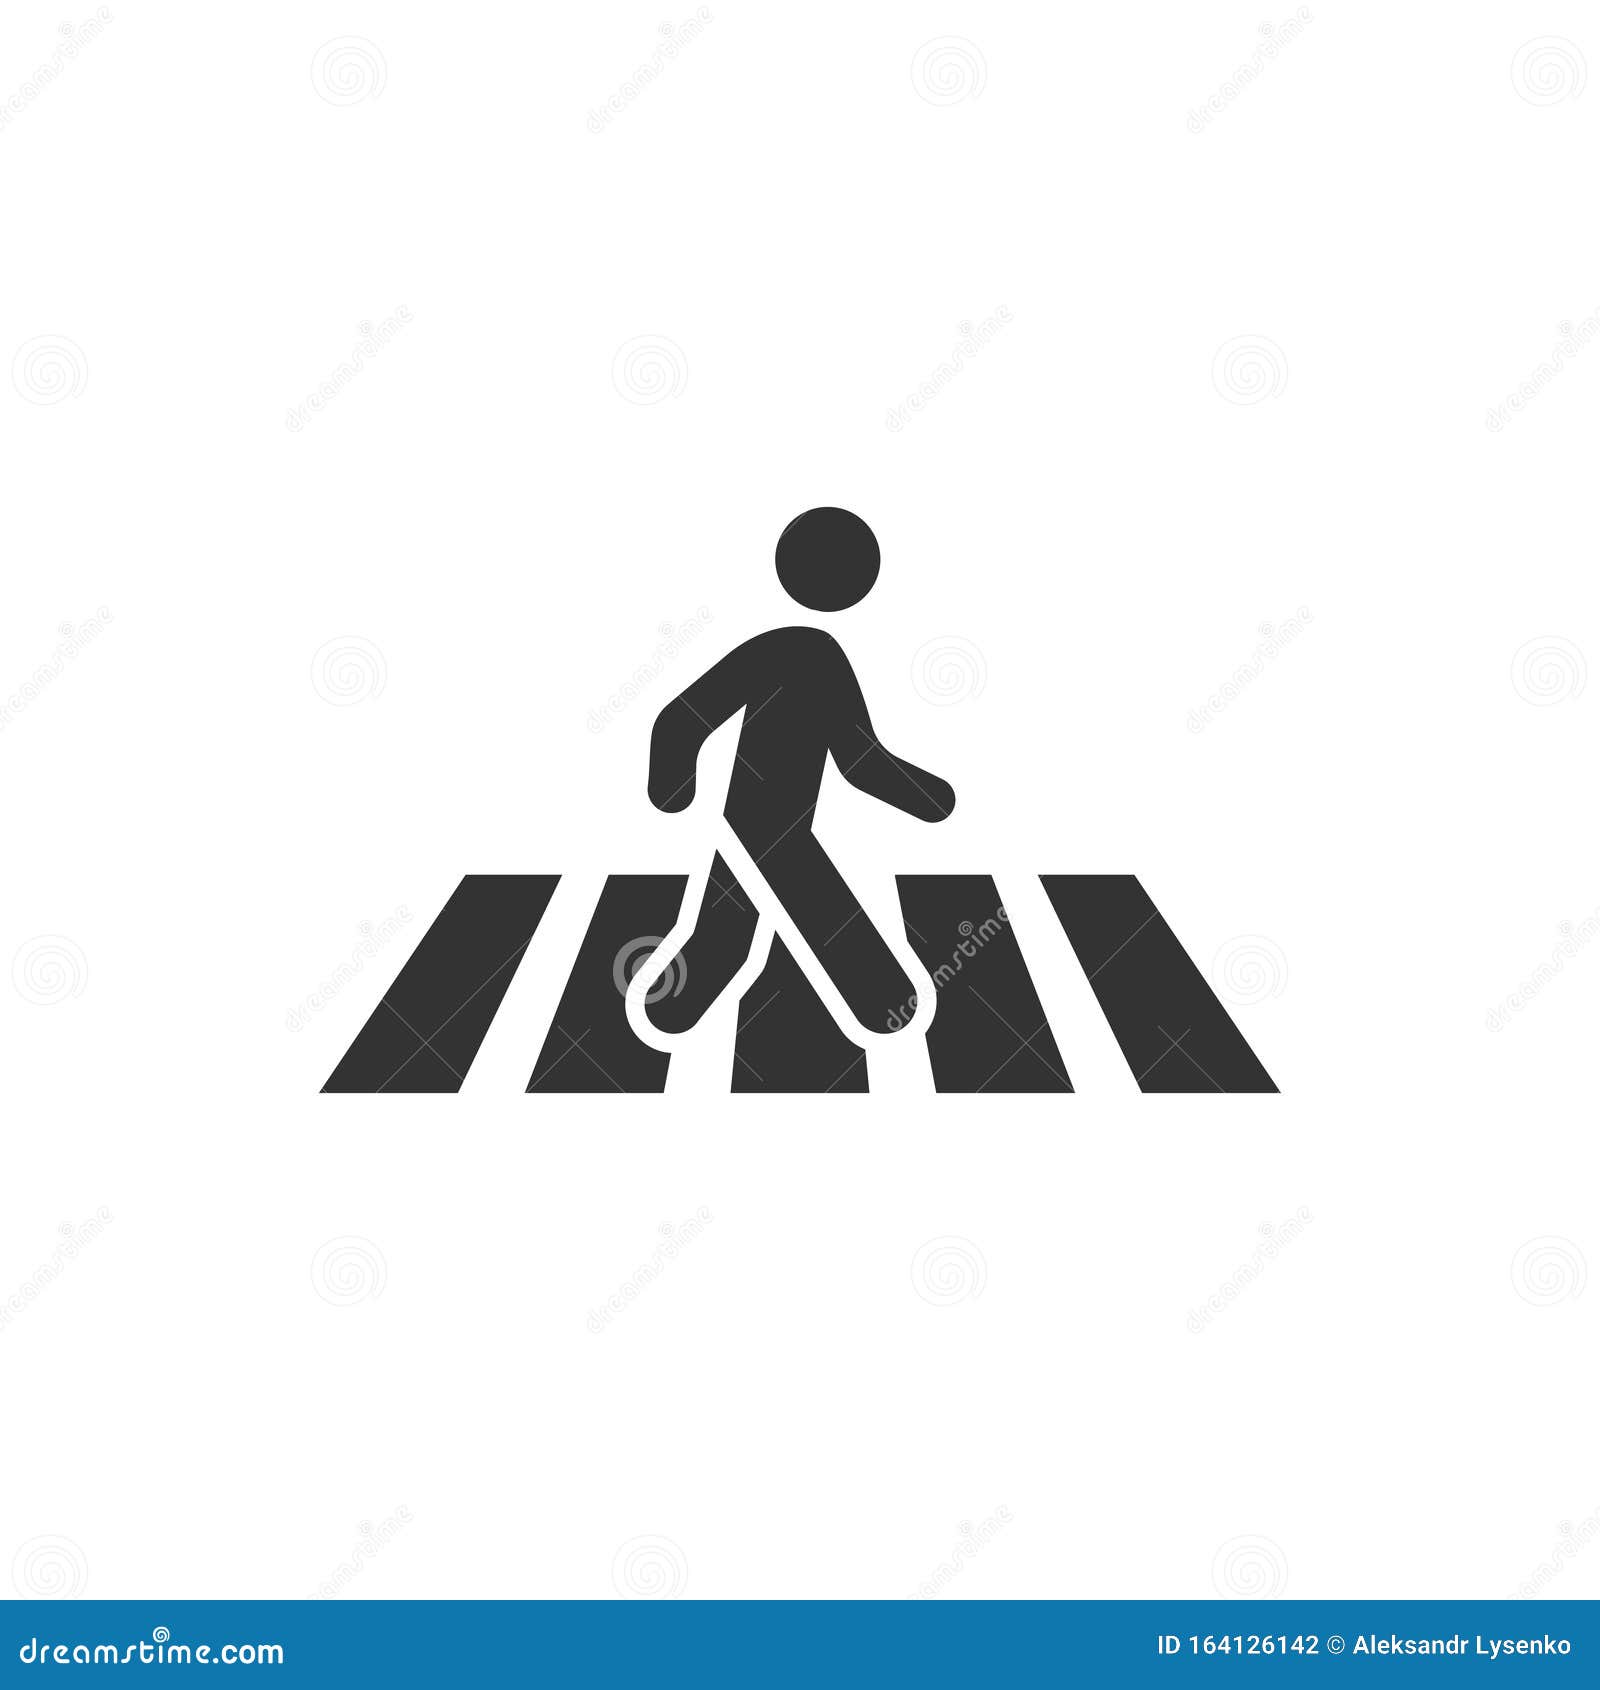 pedestrian crosswalk icon in flat style. people walkway sign   on white  background. navigation business